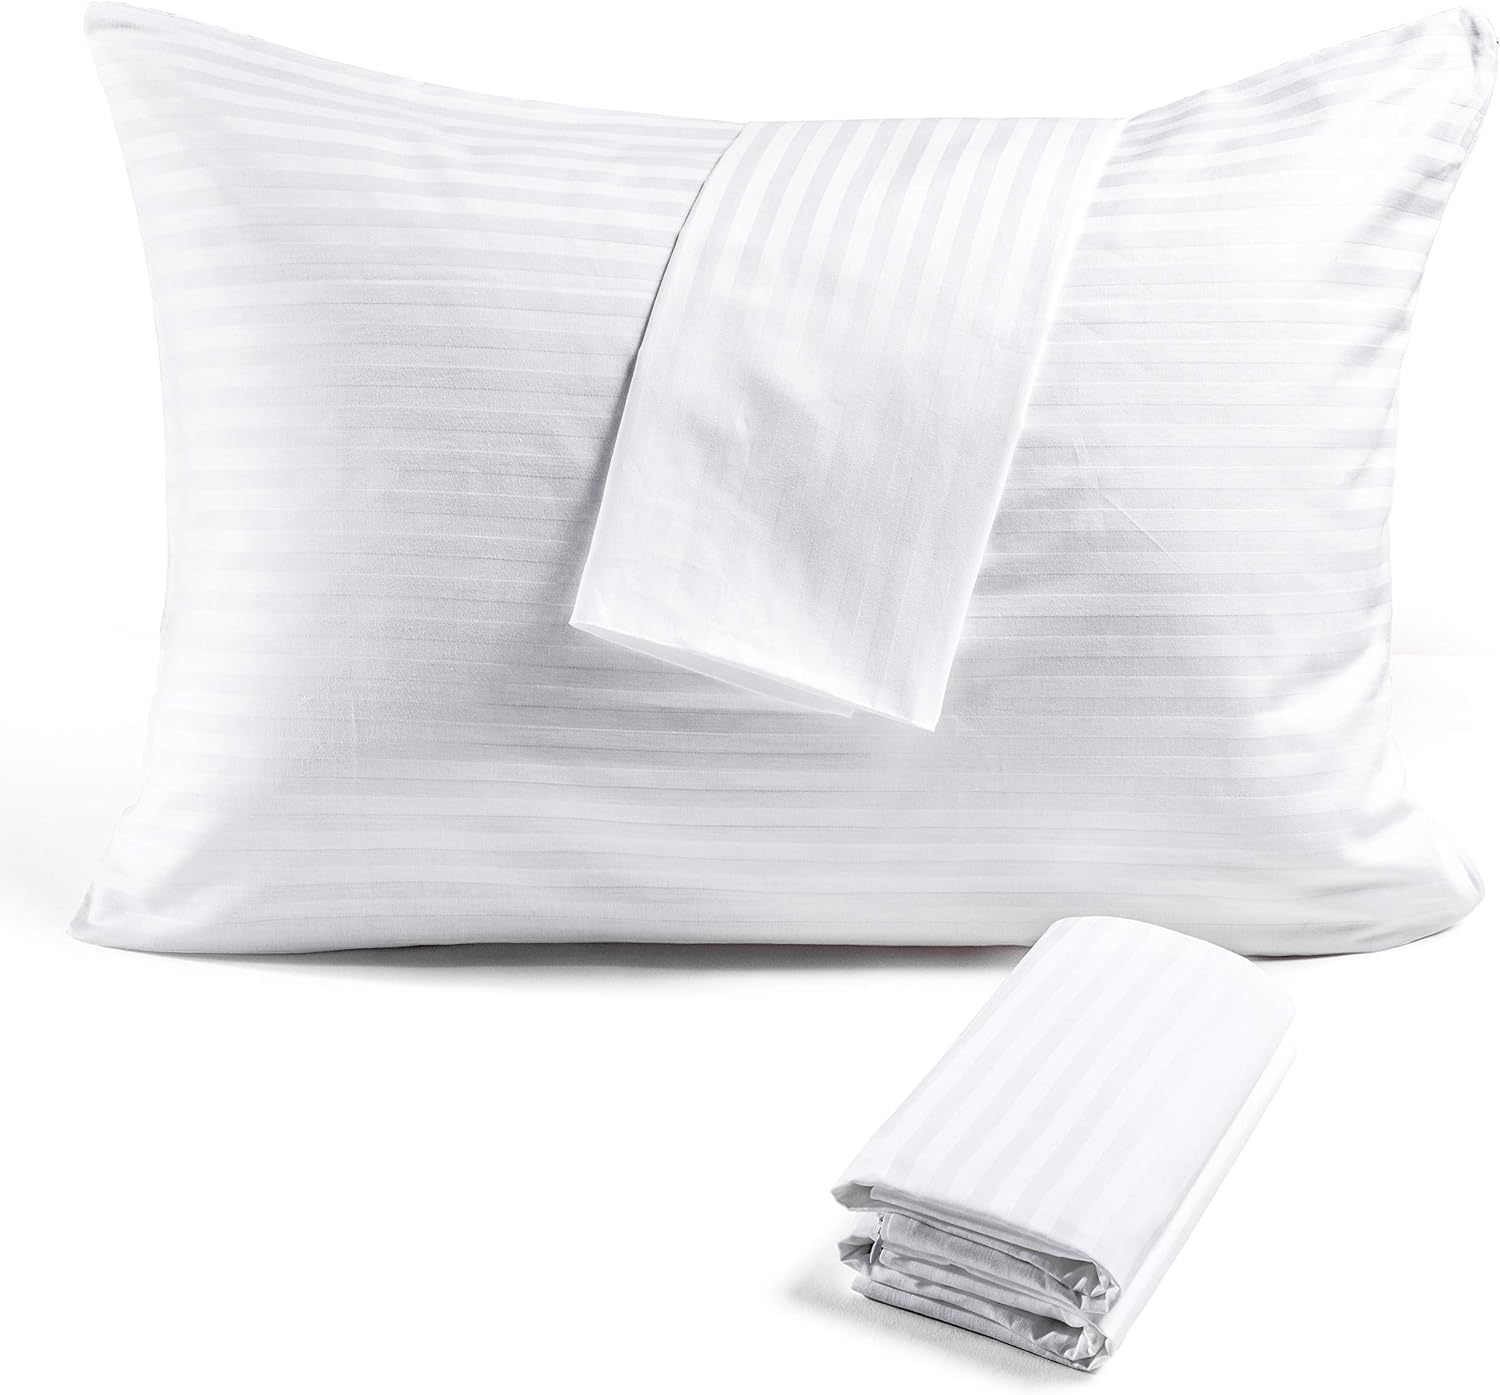 FAUNNA Zippered Pillow Protectors Cover Case (Standard, 20x26) (4-Pack) - Soft Comfortable Sateen 100% Long-Staple Cotton- Quiet and Breathable Bed Pillowcase